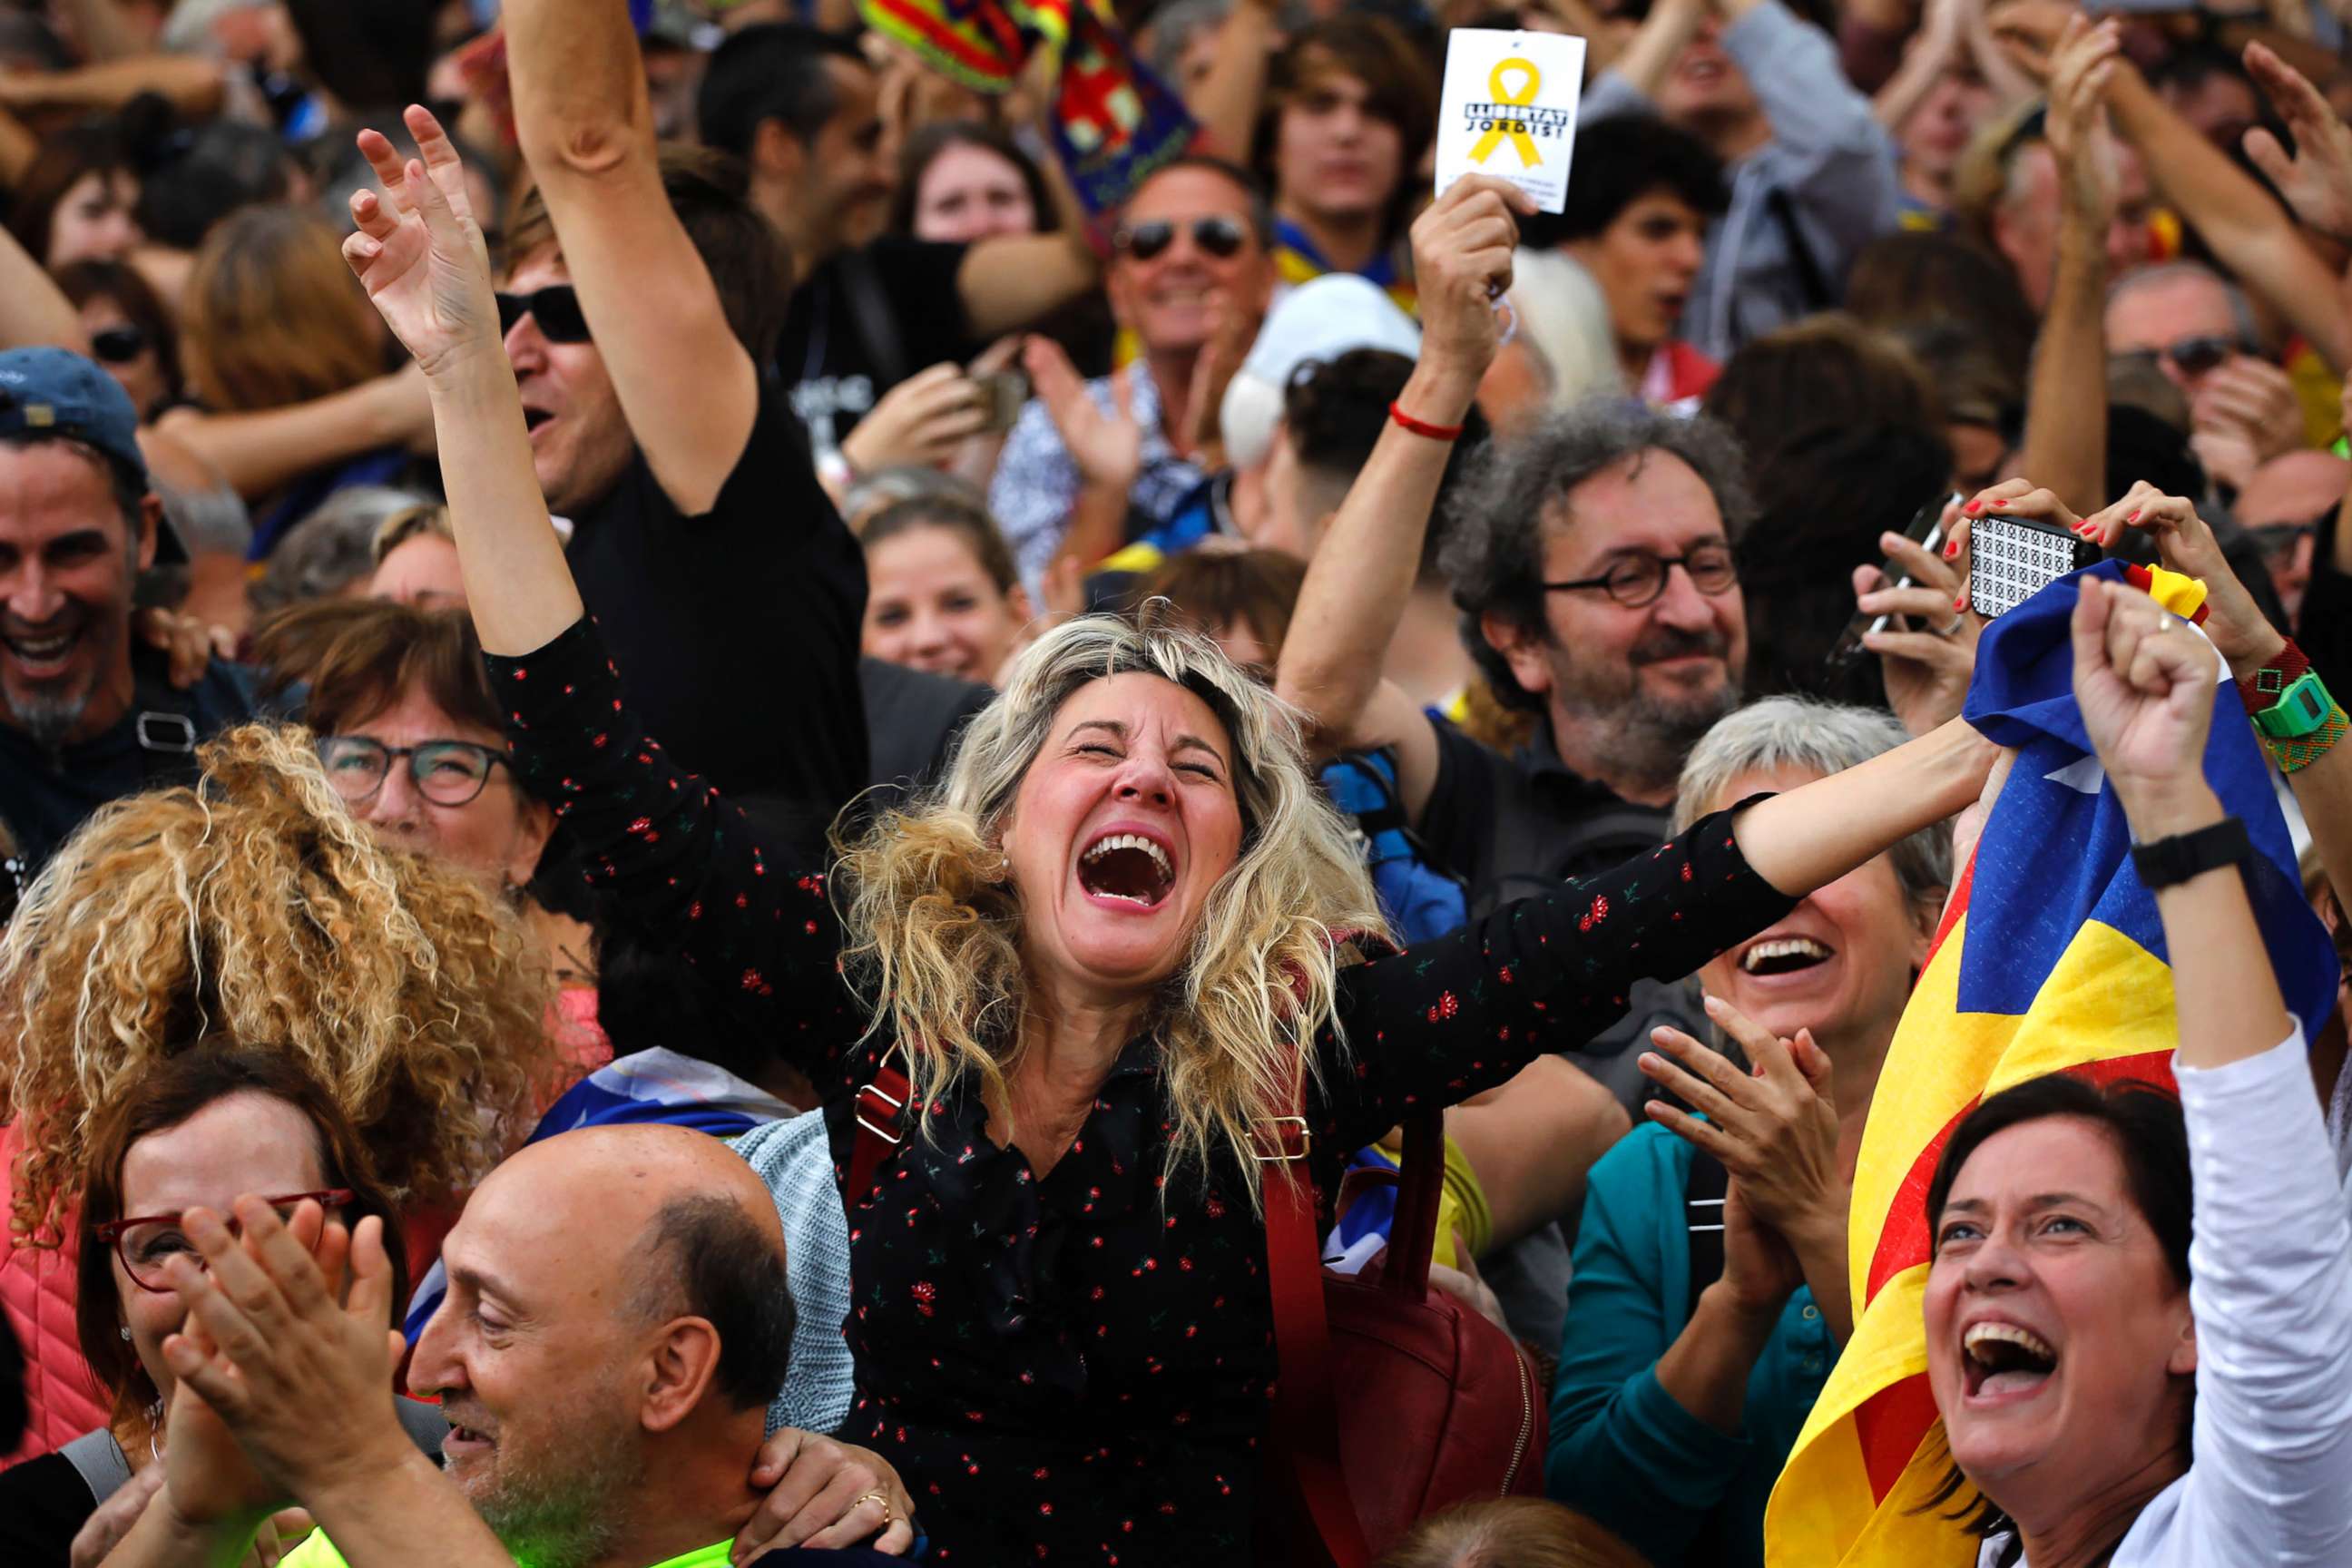 PHOTO: Maria Salut, center, reacts as they celebrate the unilateral declaration of independence of Catalonia outside the Catalan Parliament, in Barcelona, Spain, Oct. 27, 2017.  